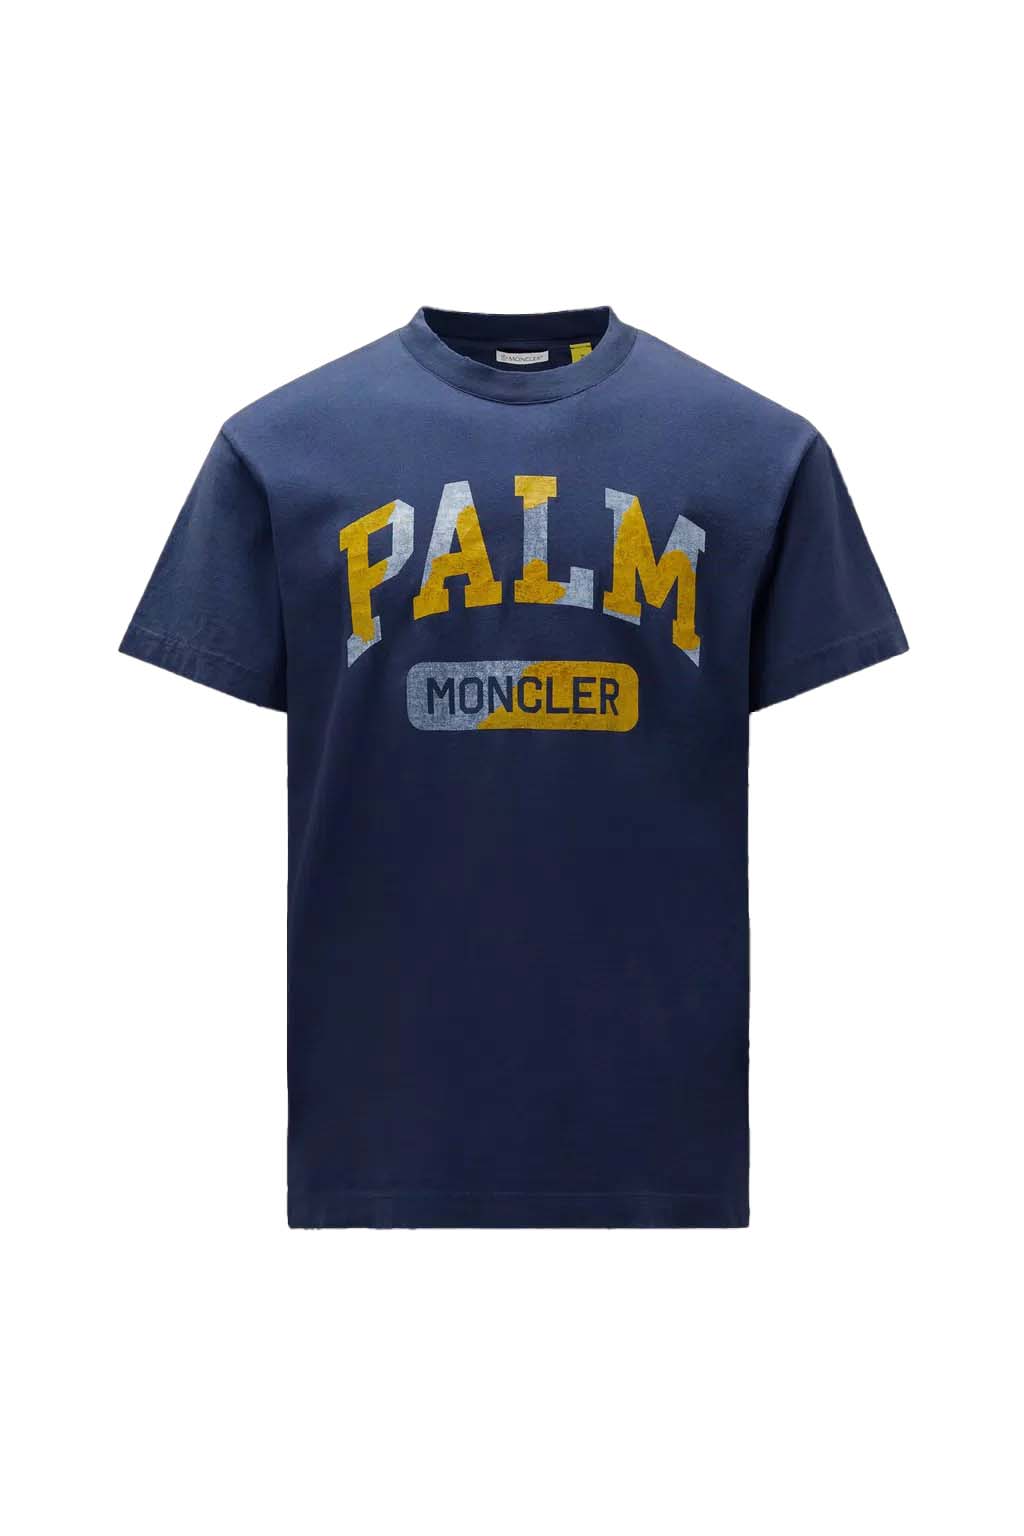 Palm Angels Logo Over T-Shirt Navy Blue/Yellow